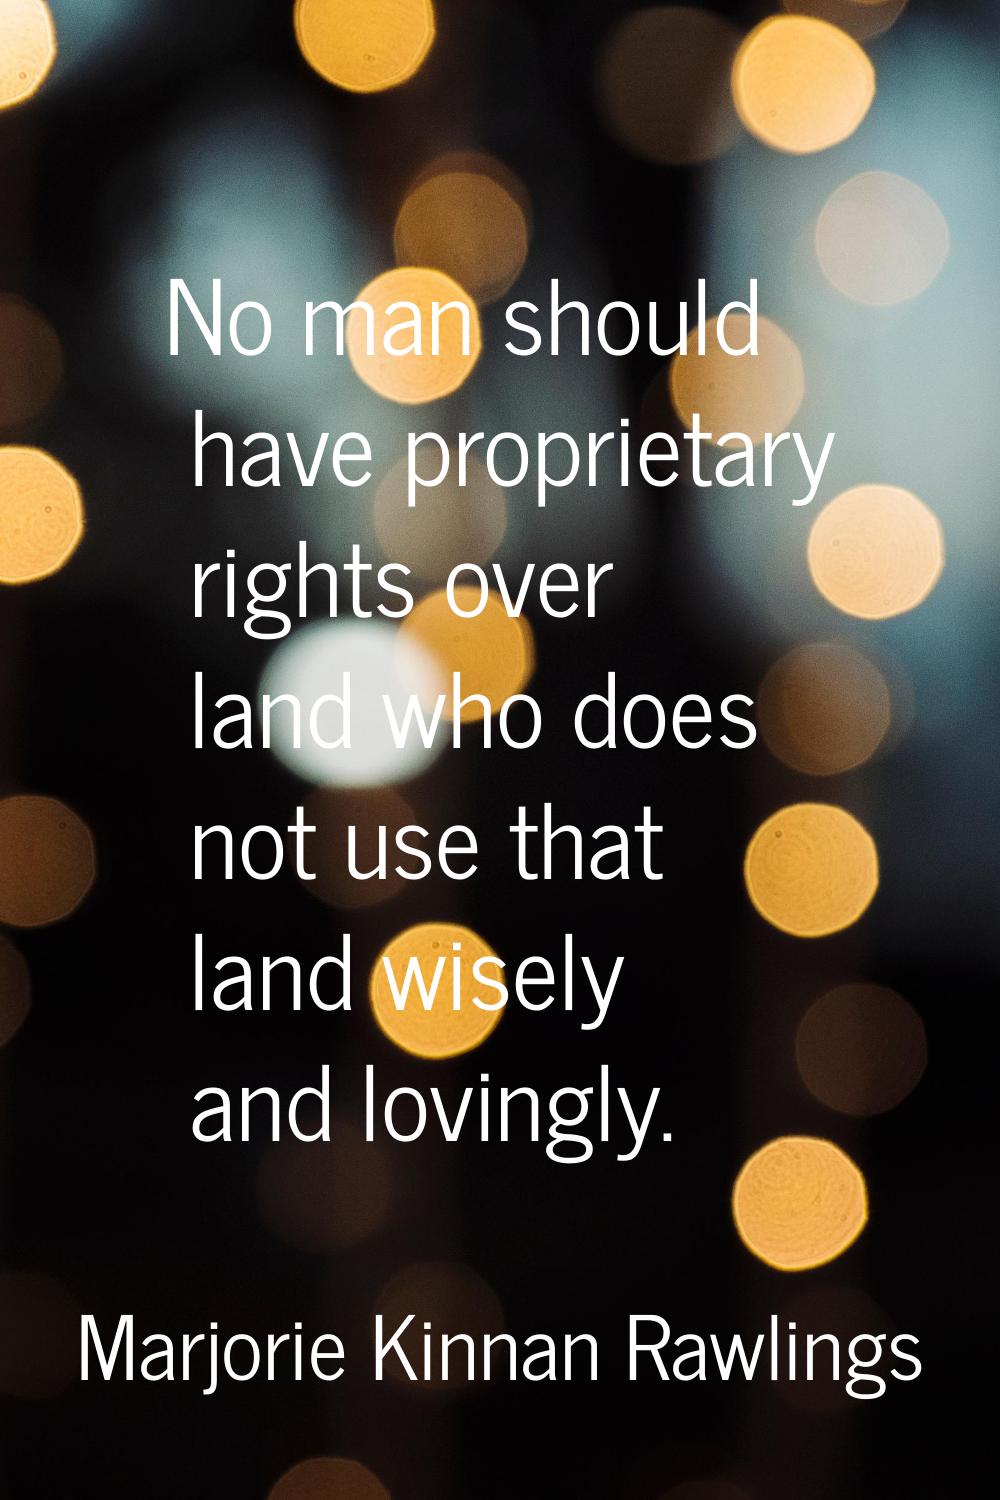 No man should have proprietary rights over land who does not use that land wisely and lovingly.